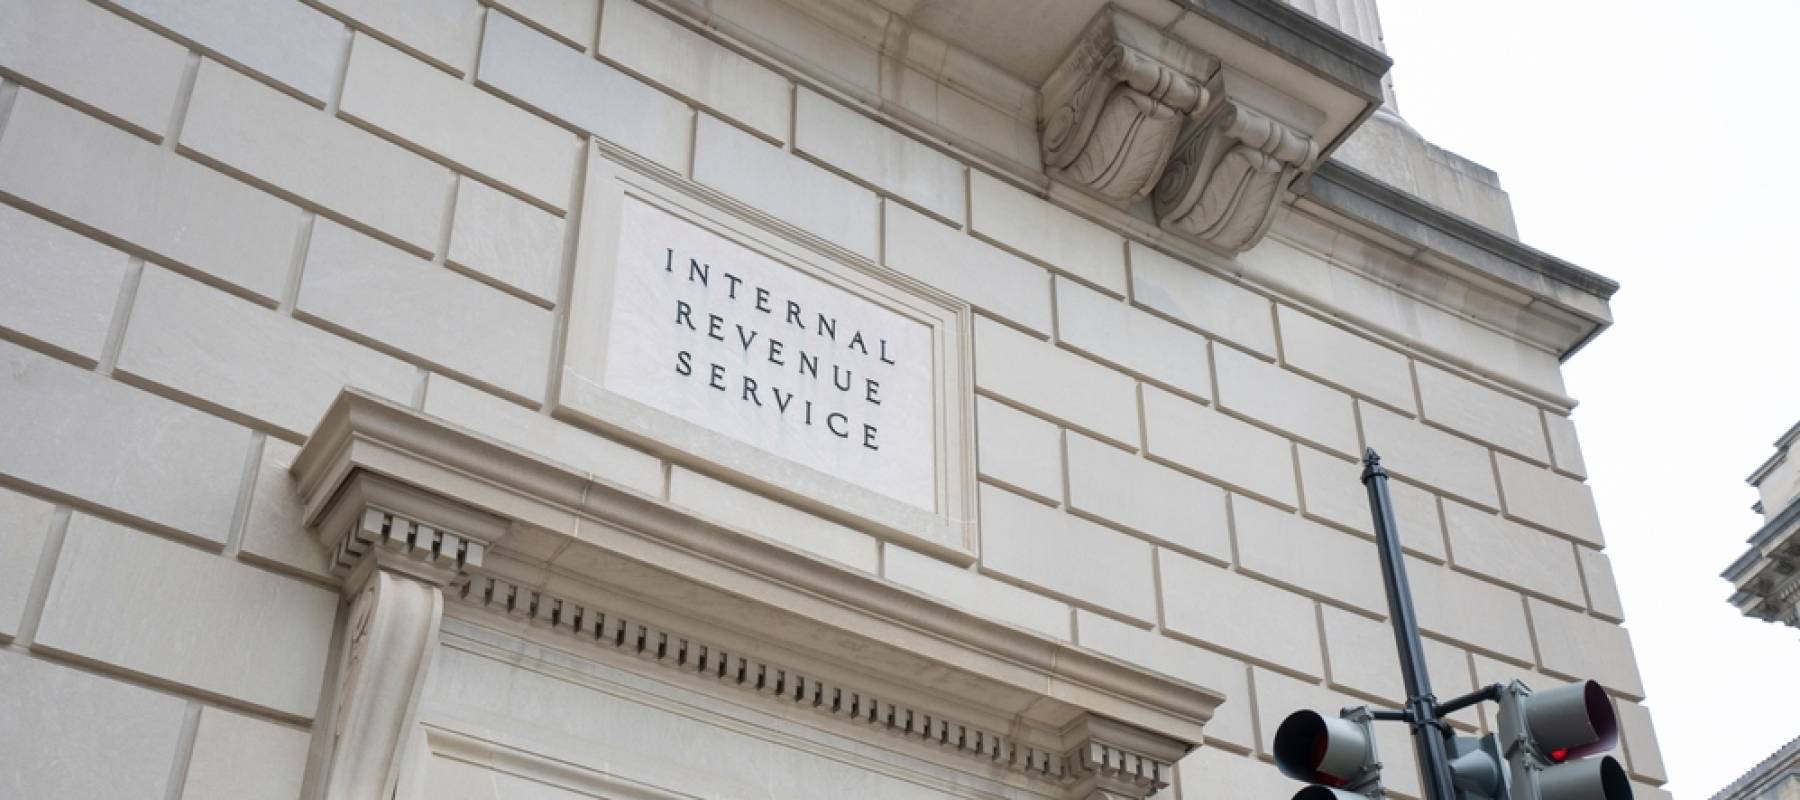 The Internal Revenue Service (IRS) Building, located in the center of the Federal Triangle complex in Washington, DC.